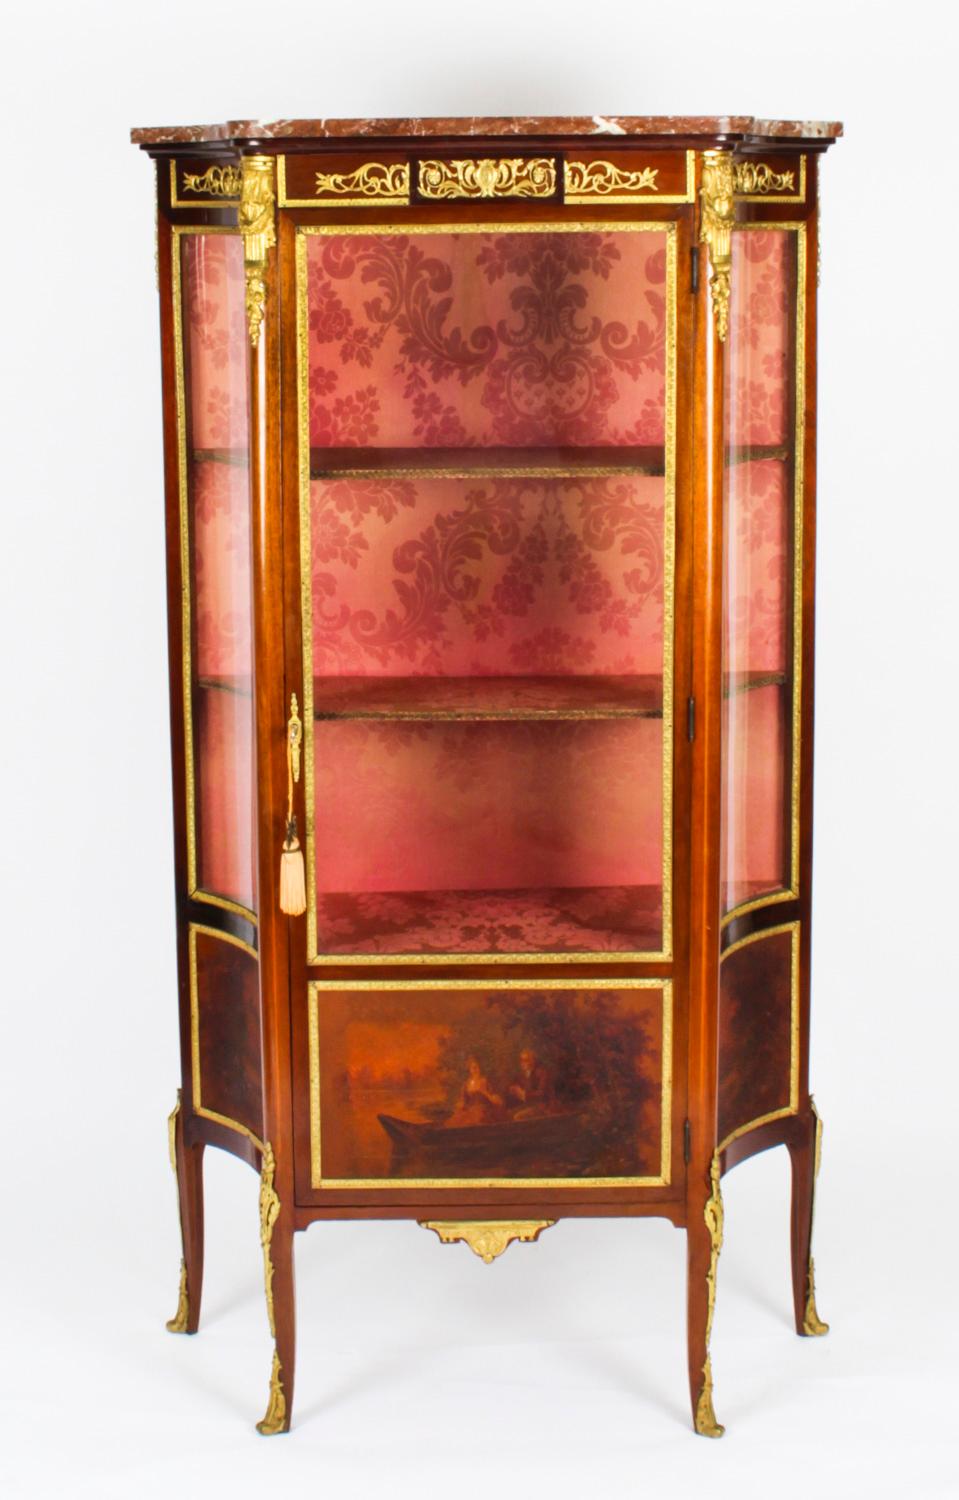 This is a fabulous antique French Louis Revival Vernis Martin ormolu mounted mahogany display cabinet, circa 1880 in date.

This beautiful cabinet has hand painted decoration, exquisite ormolu mounts and a beautiful marble top. The central panel